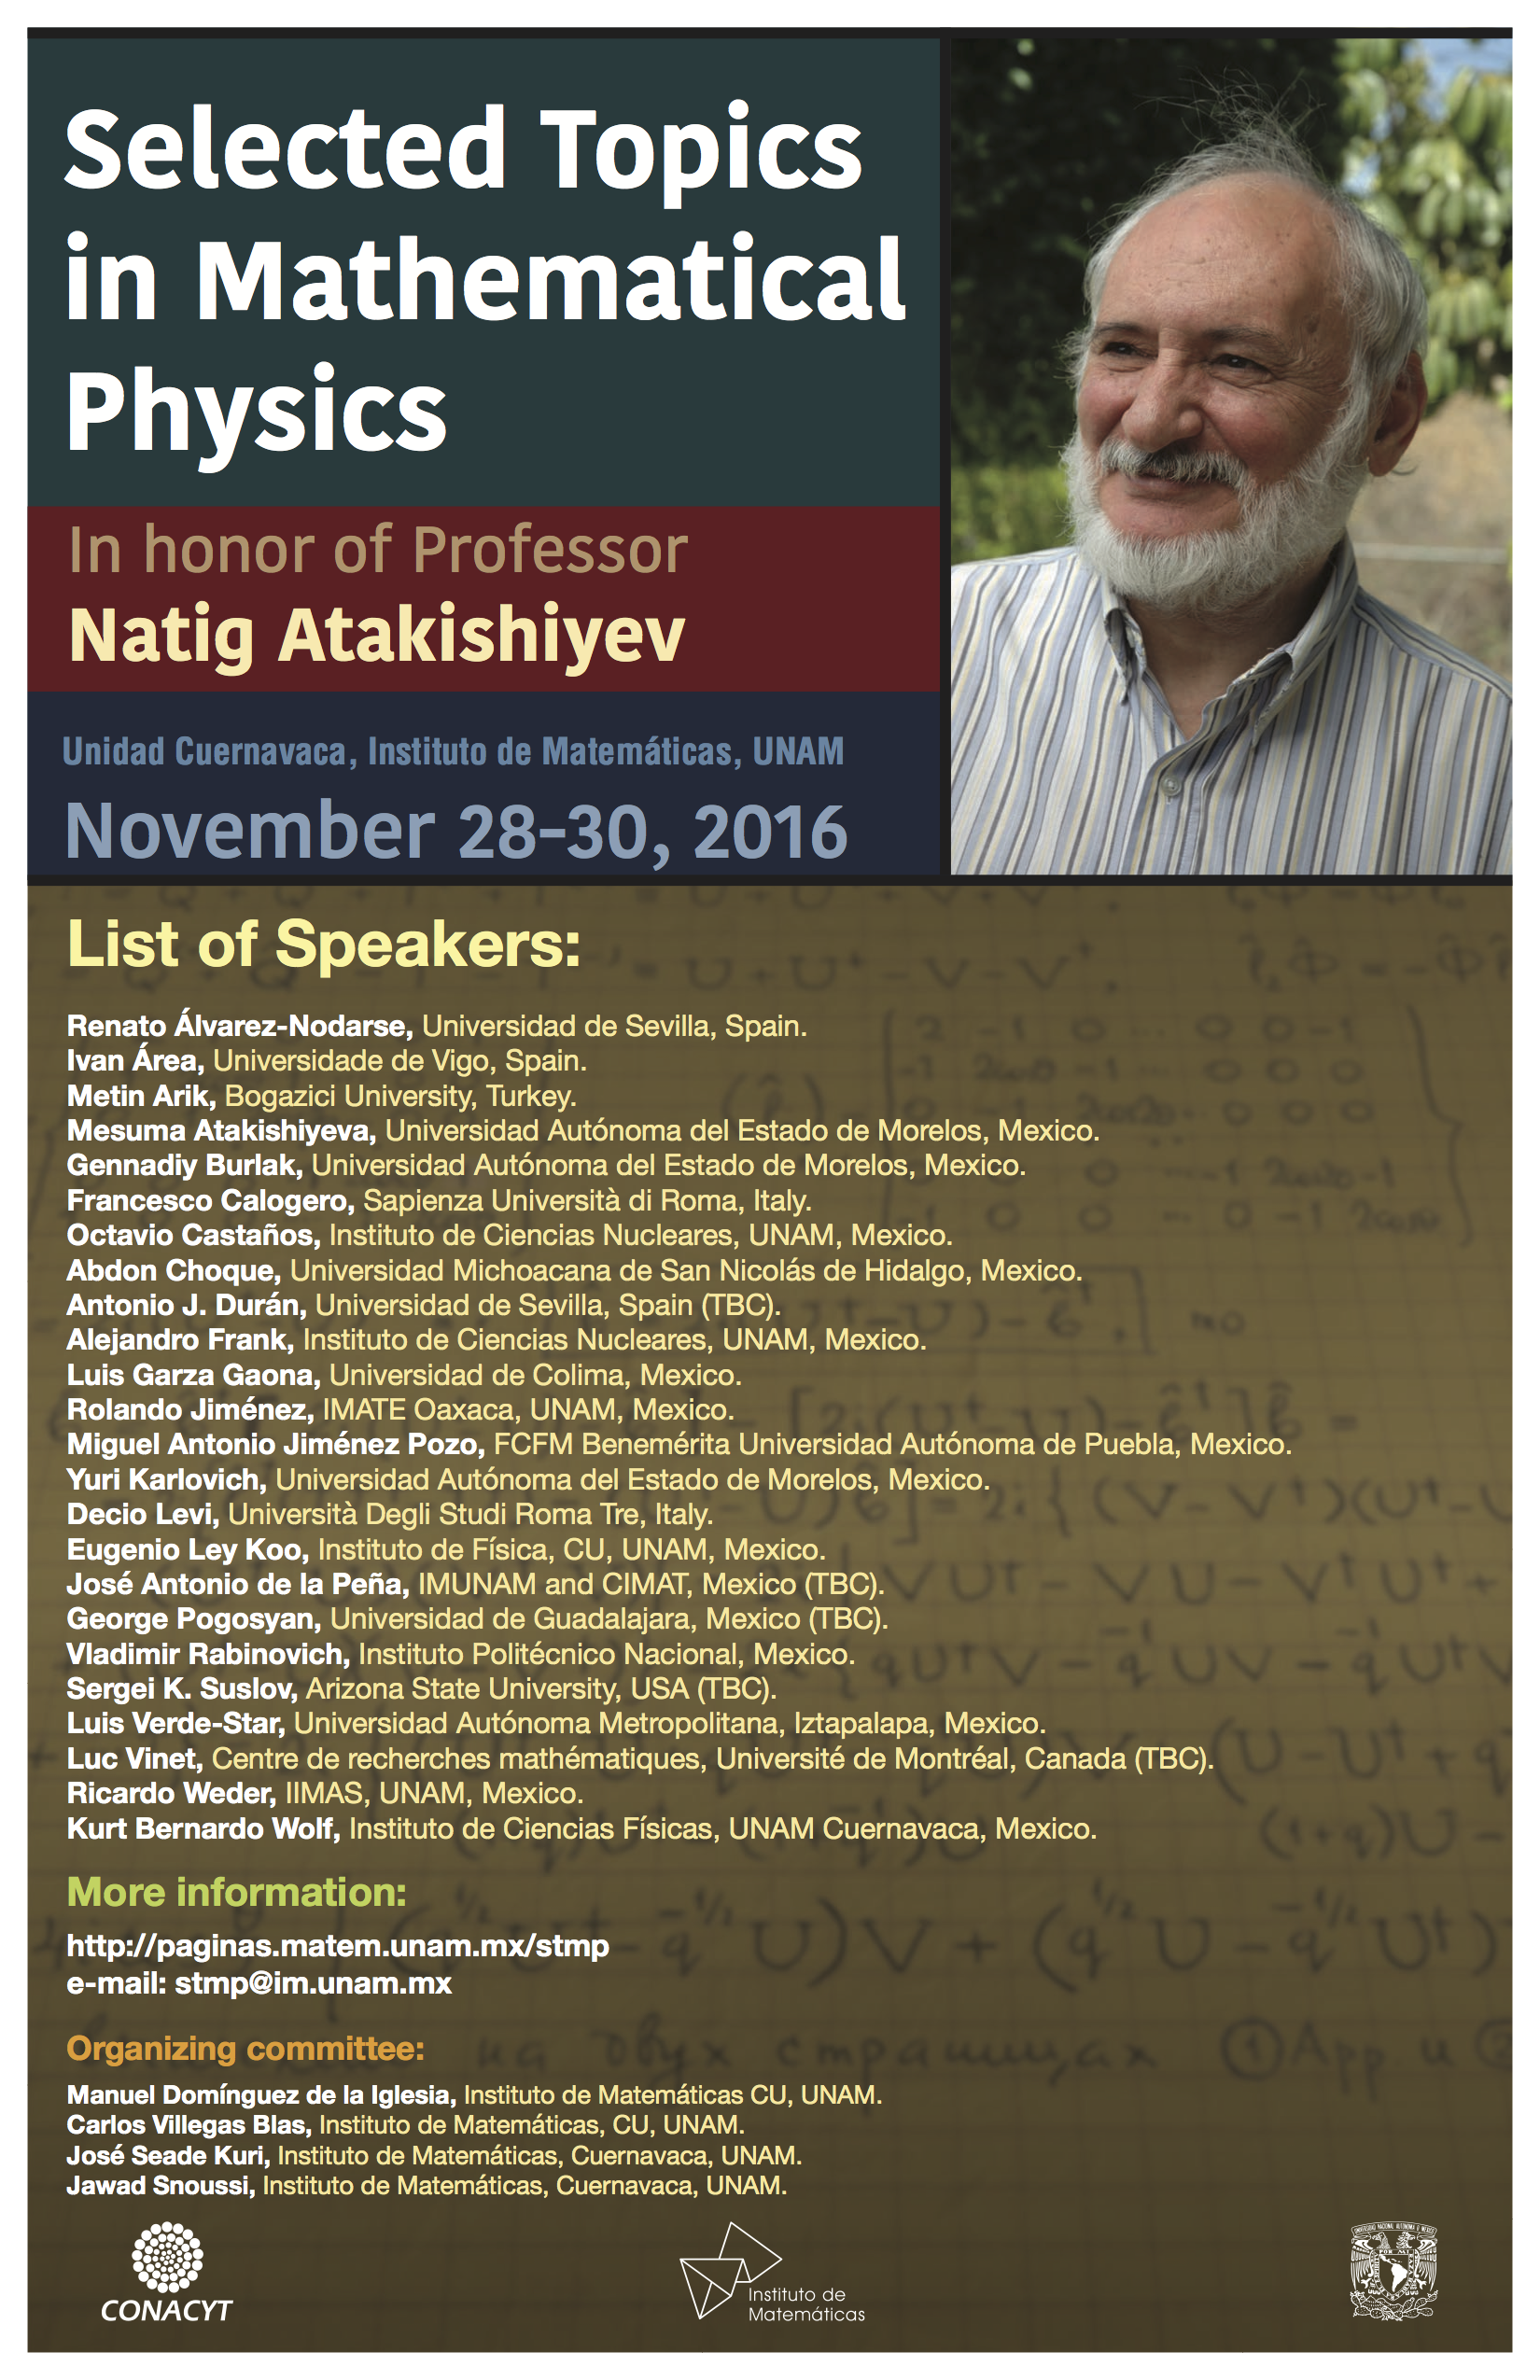 Selected Topics in Mathematical Physics